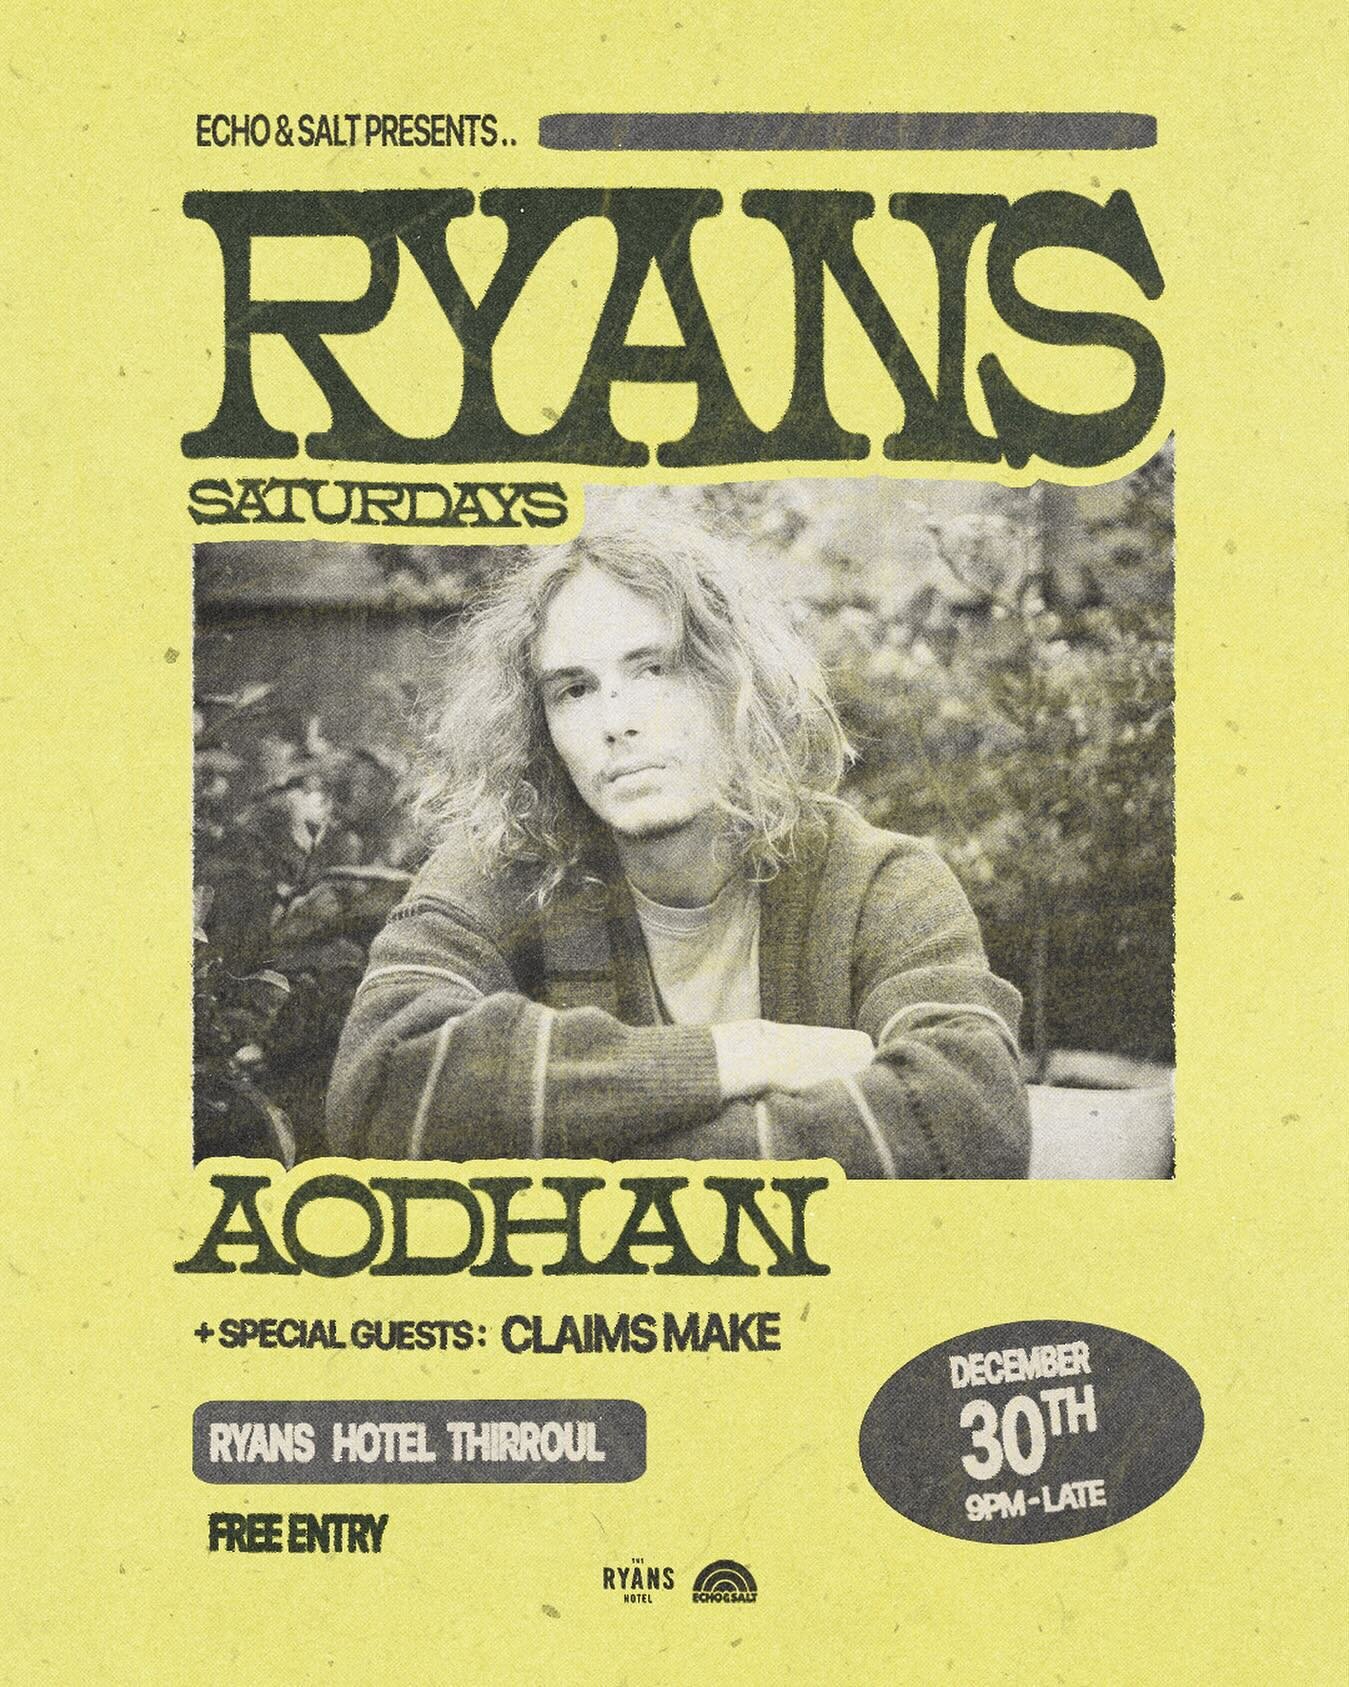 Playing a free entry show at Ryans in Thirroul this Saturday! You should come along!